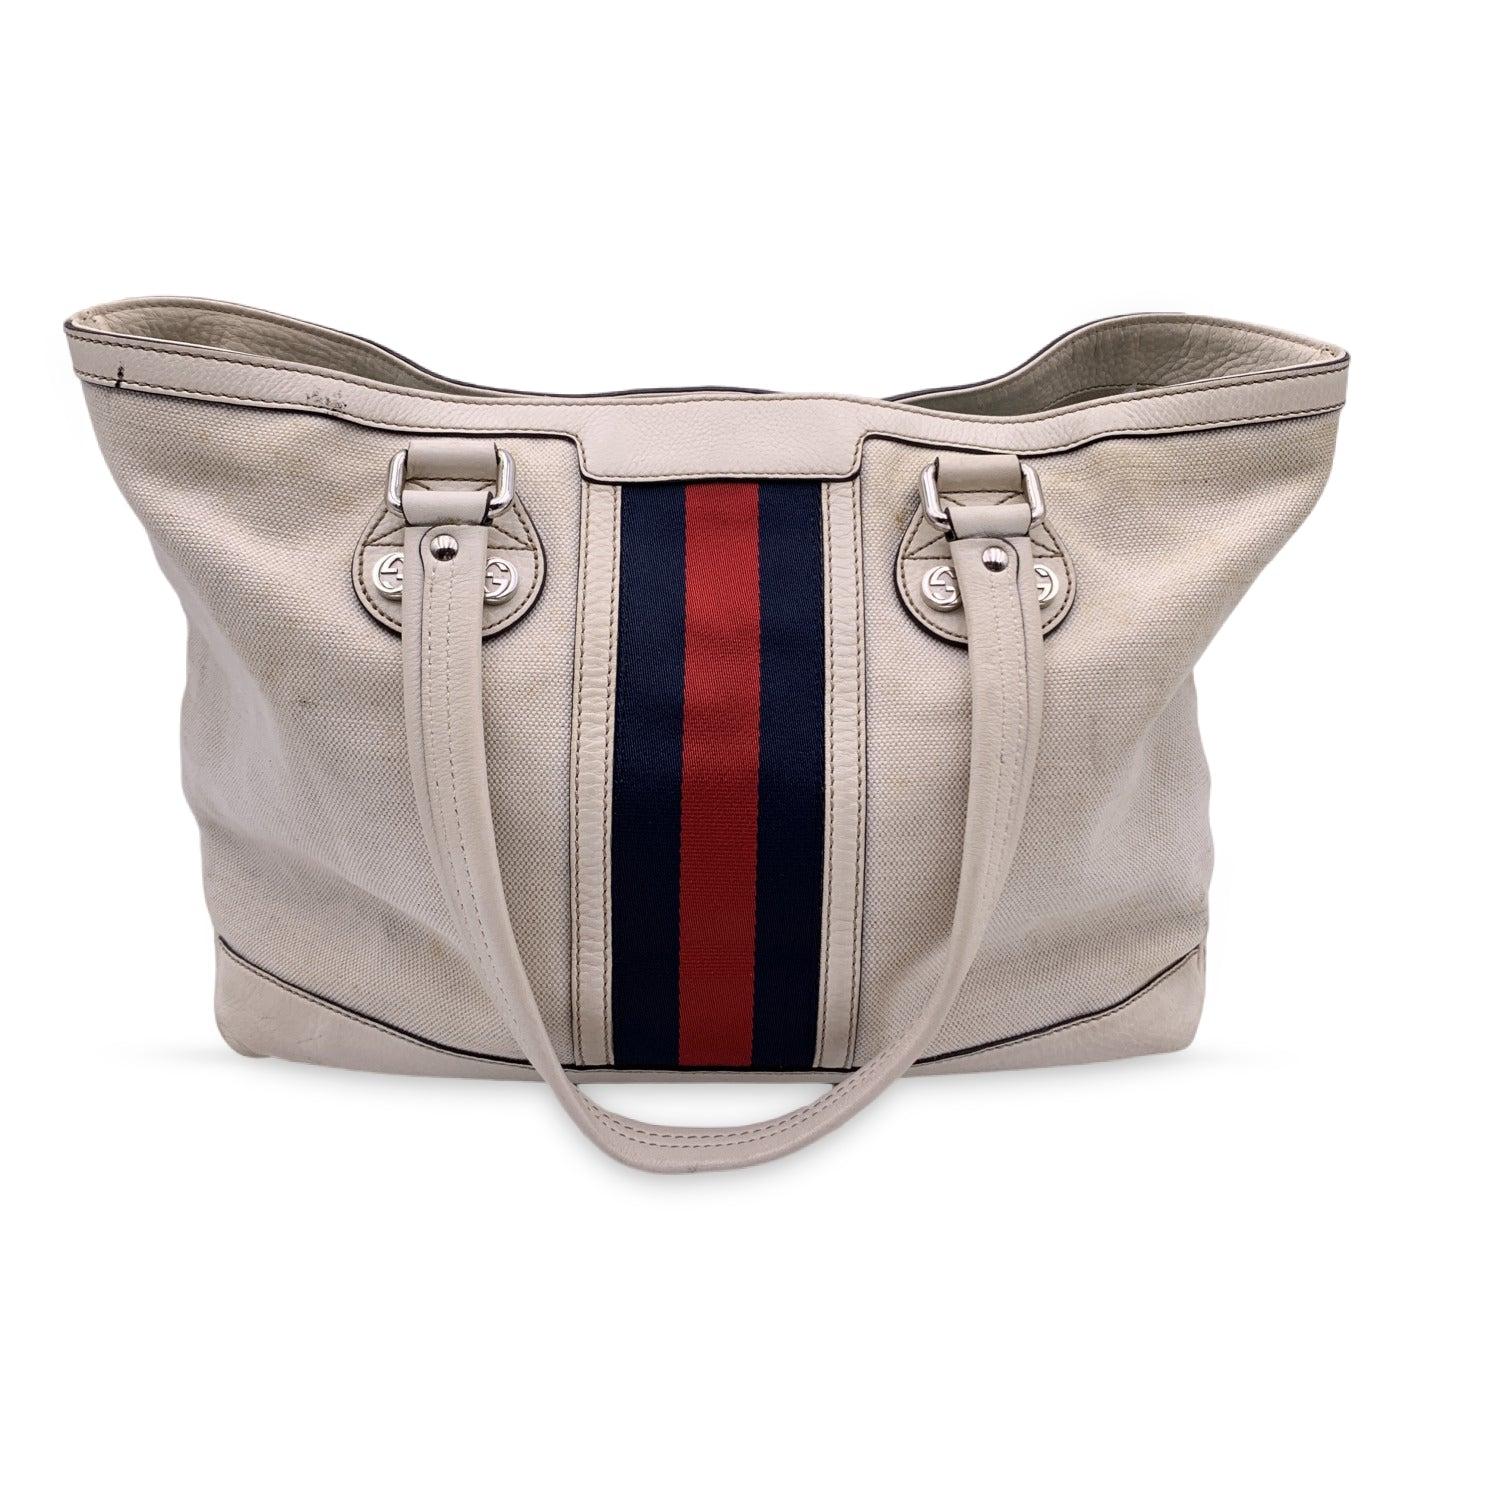 This beautiful Bag will come with a Certificate of Authenticity provided by Entrupy. The certificate will be provided at no further cost GUCCI white canvas Web Sunset Tote bag. This tote is crafted of white canvas with blue/red/blue signature